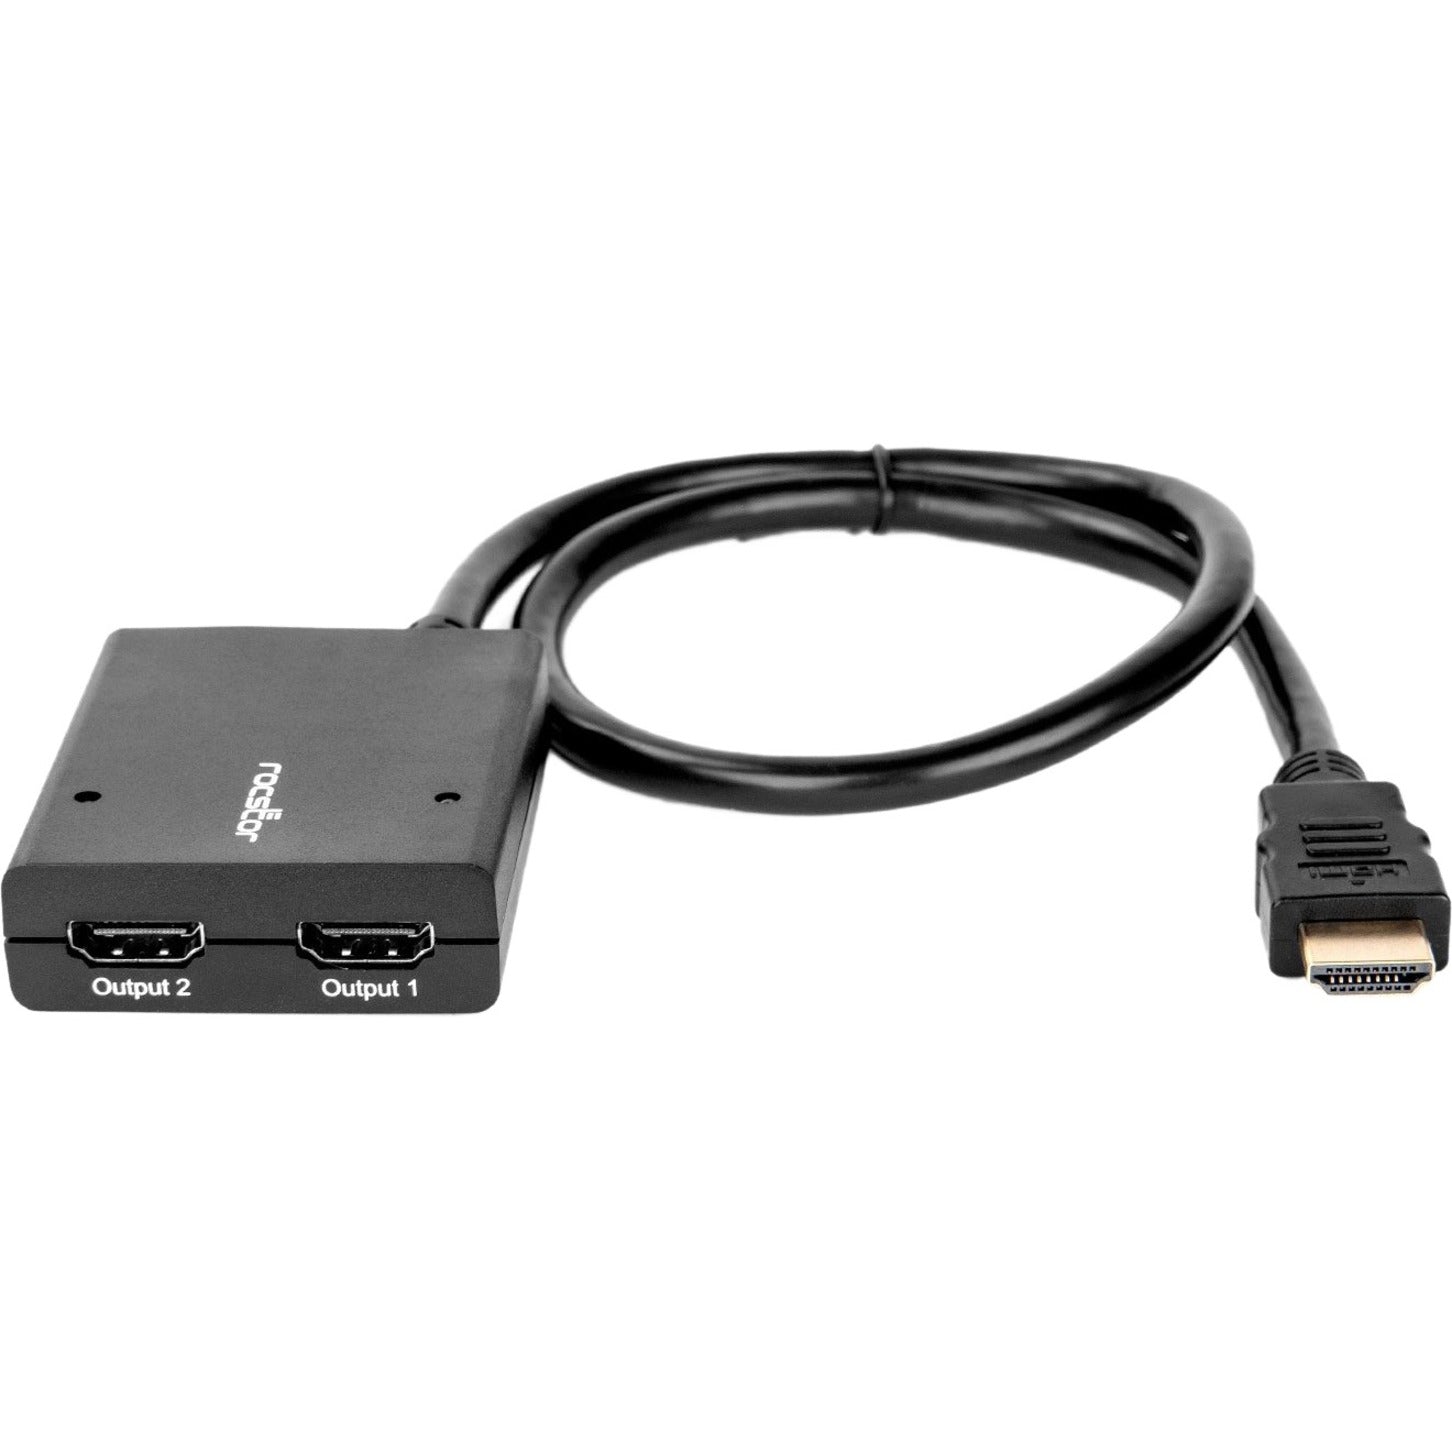 Rocstor Y10A235-B1 2-Port HDMI Splitter with USB Power-4K, Enhance Your Viewing Experience